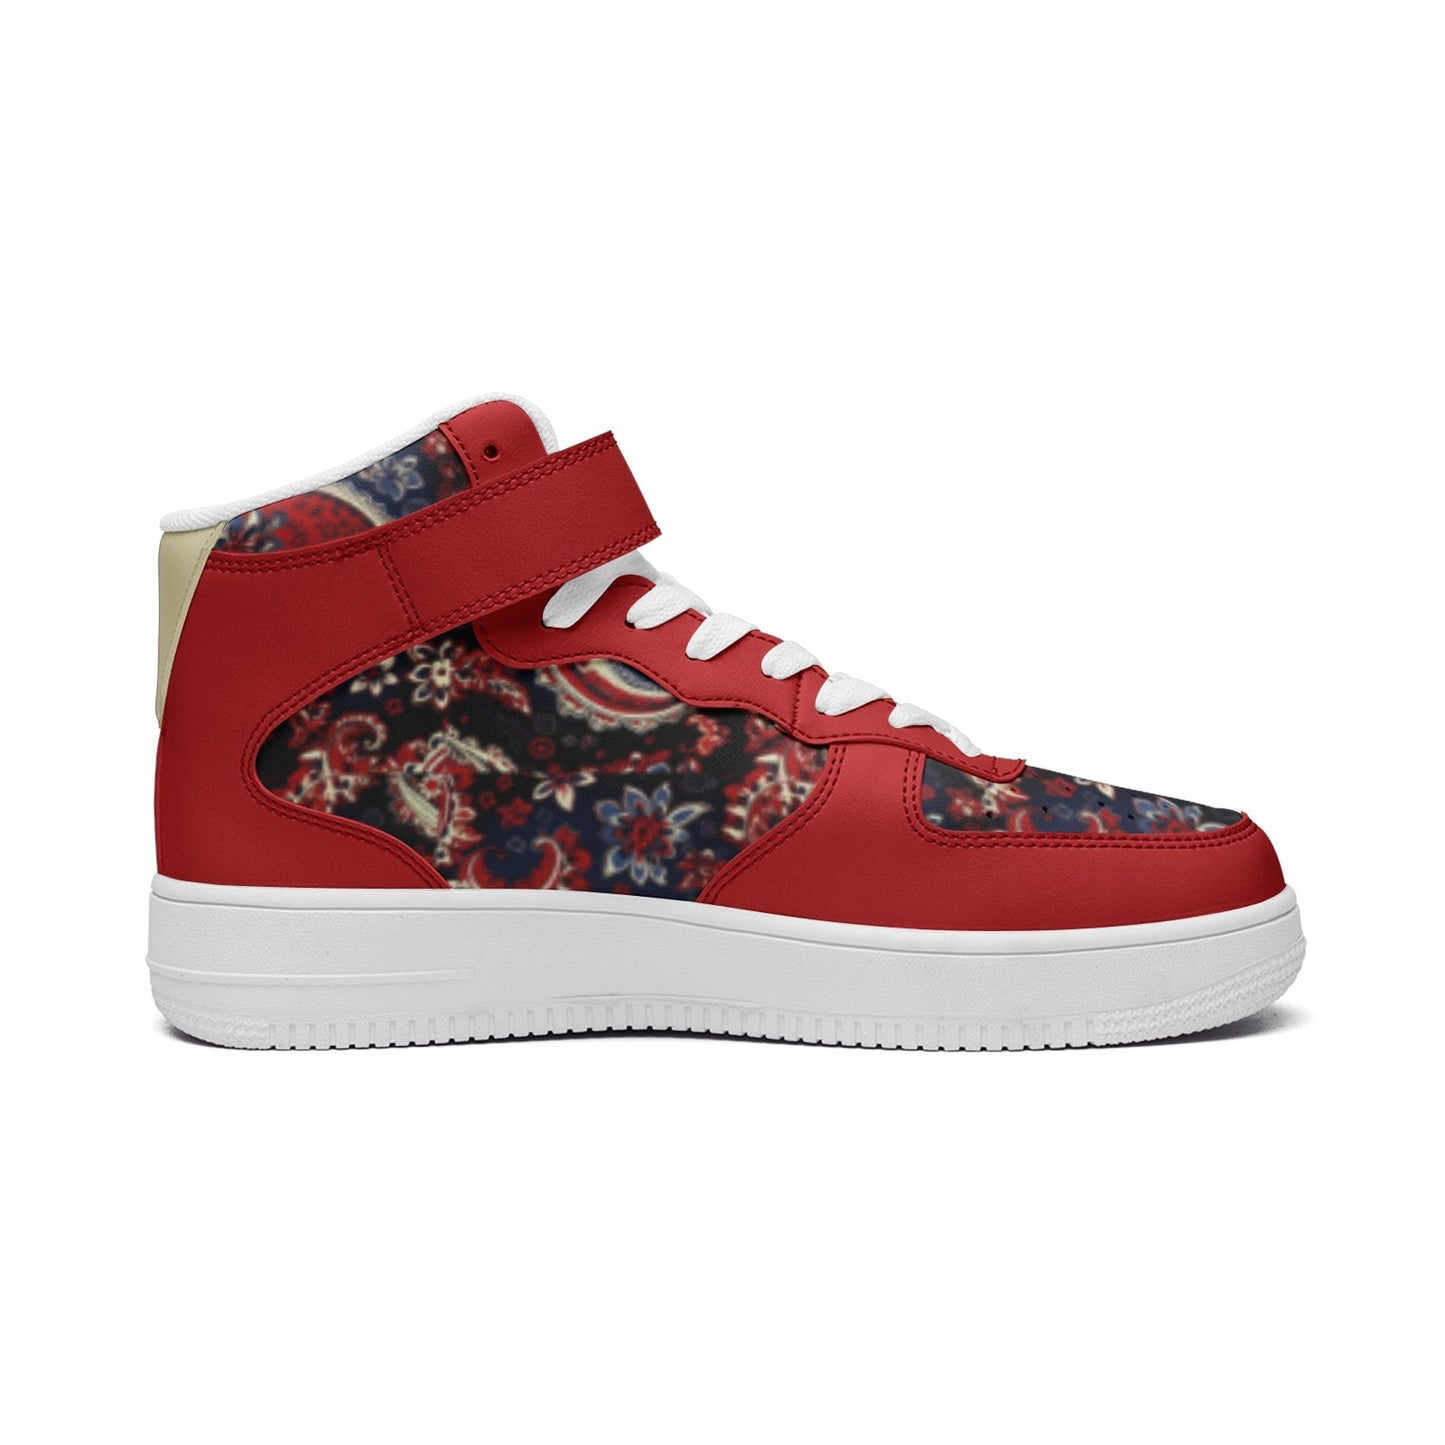 Red and Blue Paisley Bandana High Top Sneakers